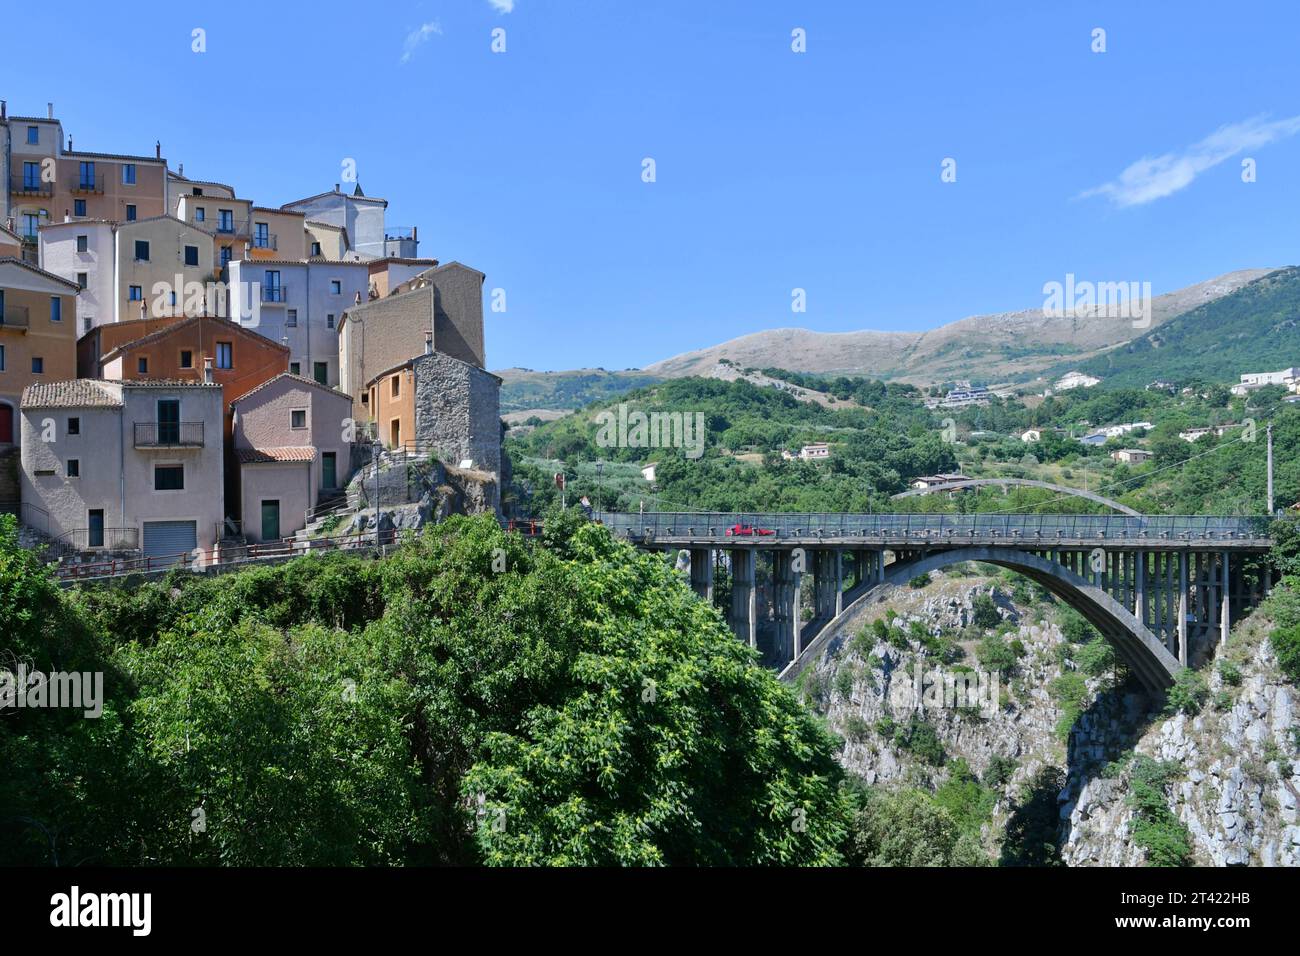 View of an old village in the mountains of Basilicata region. Stock Photo